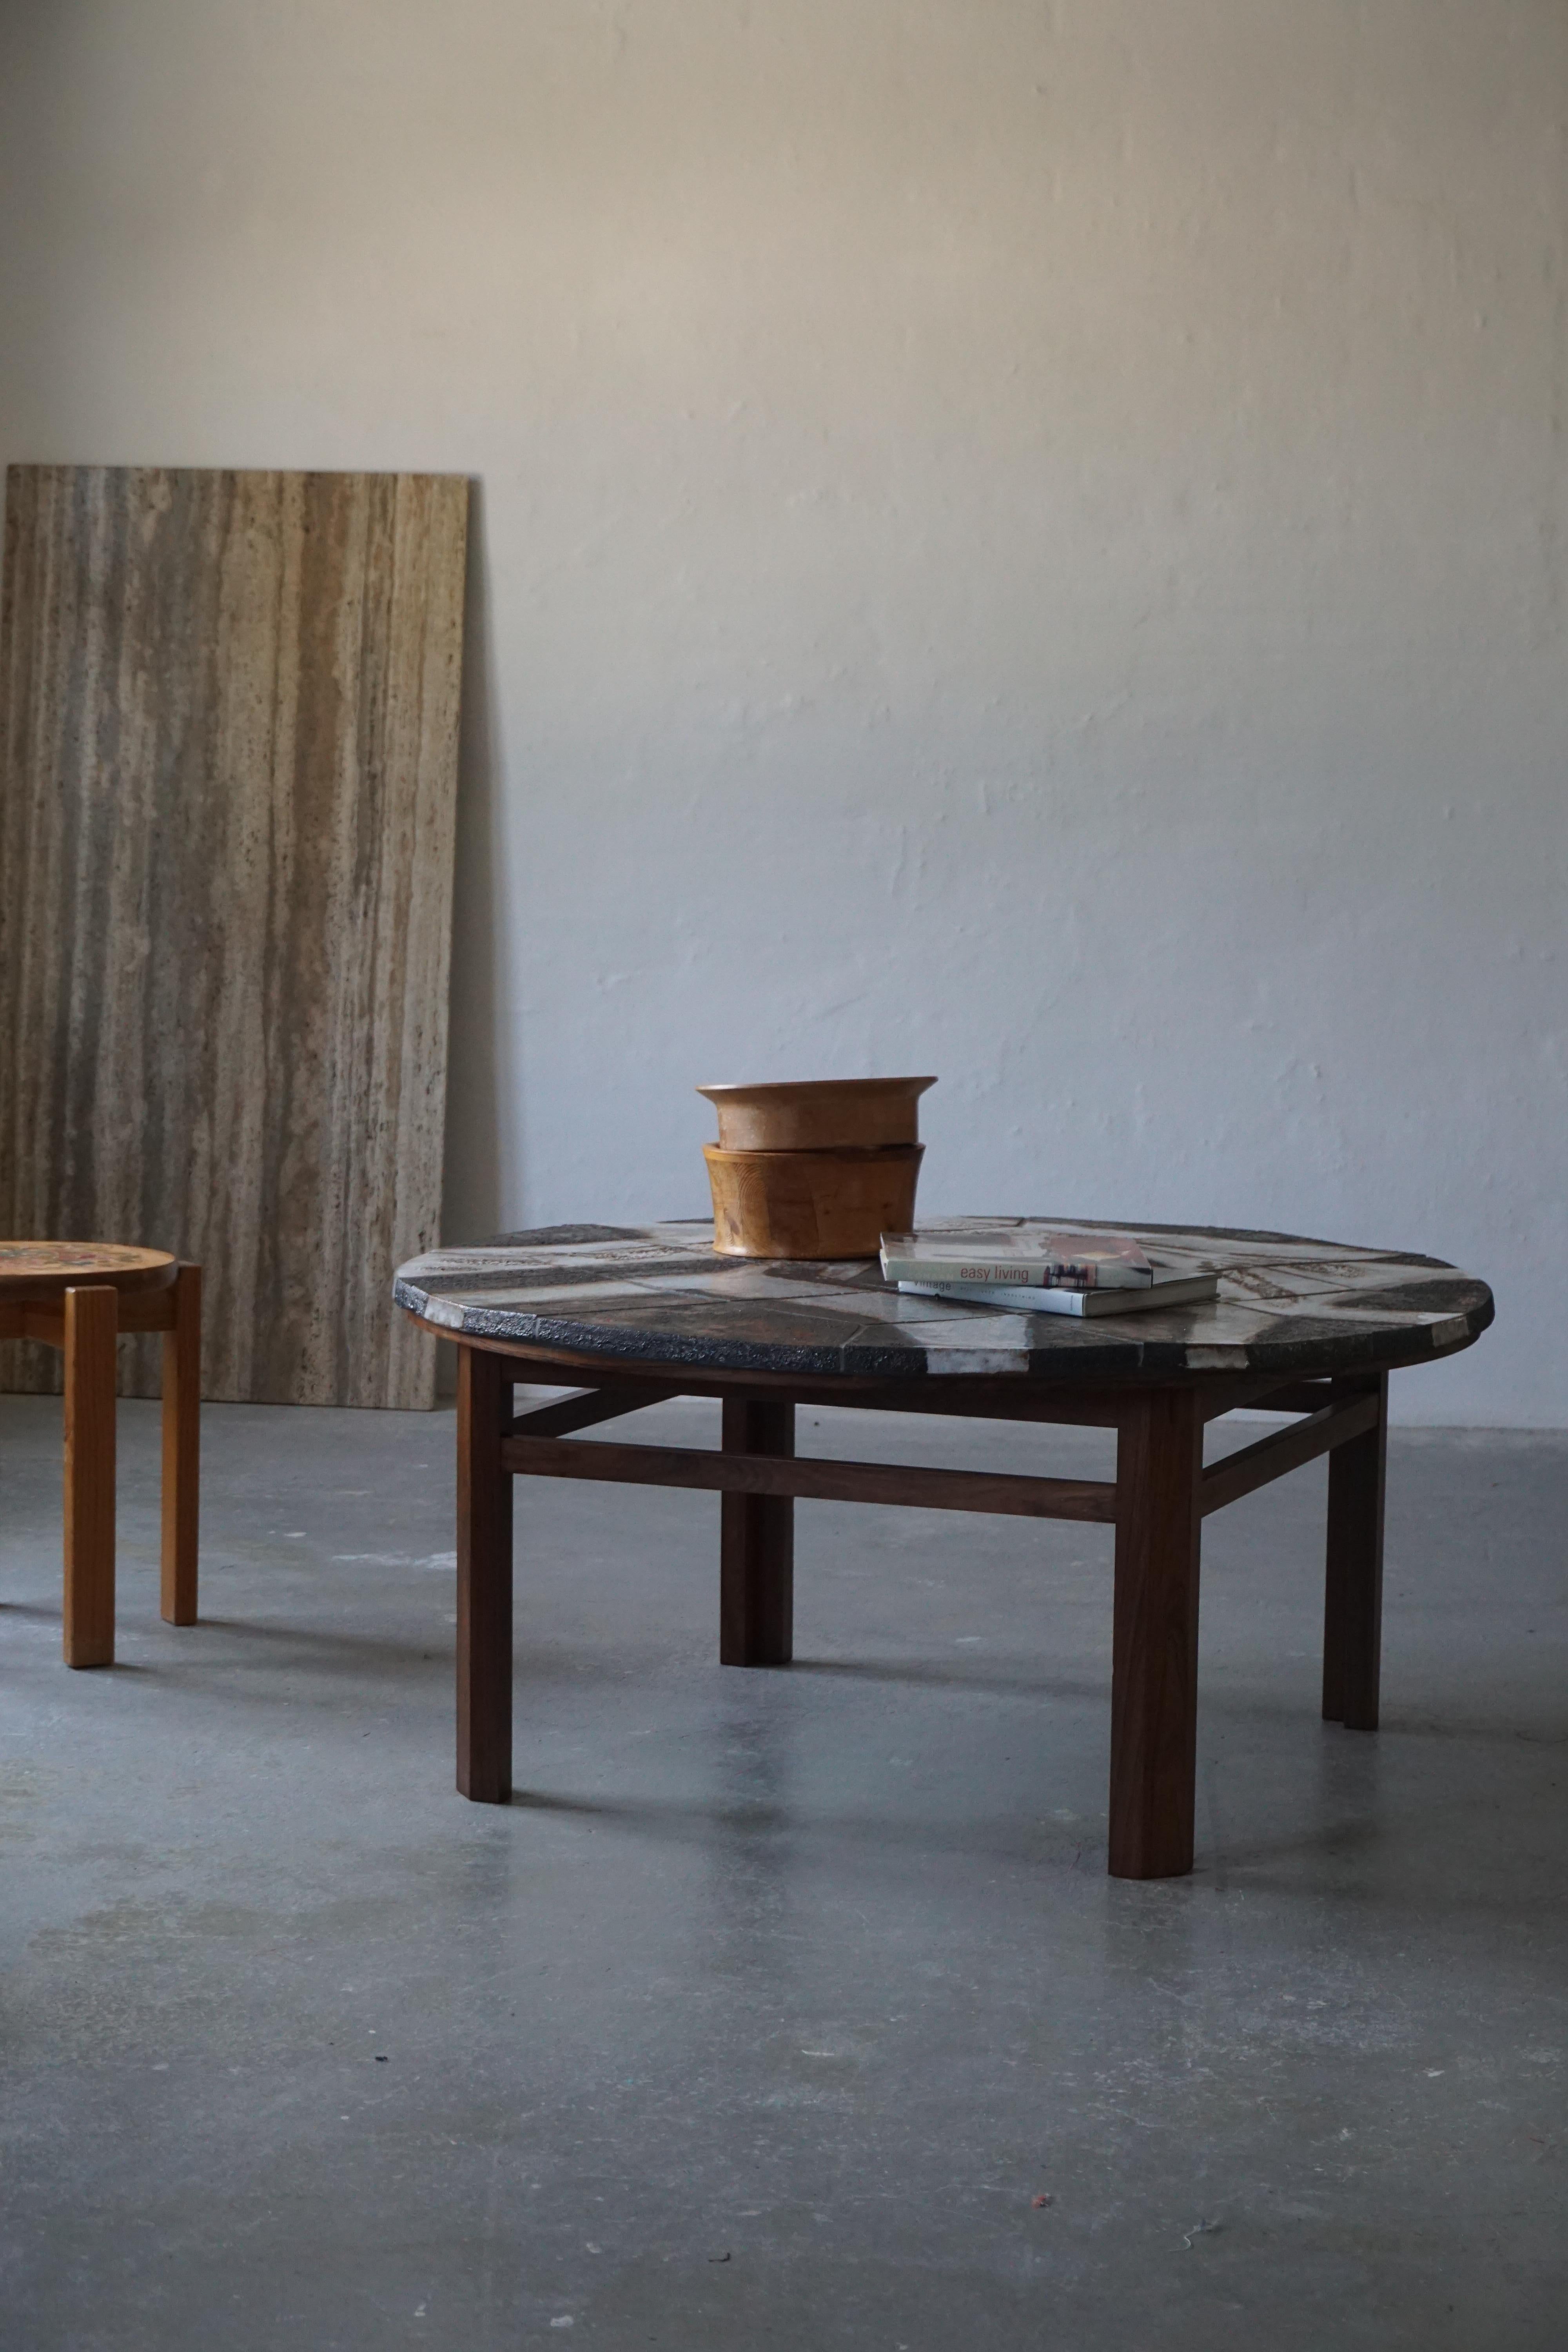 Mid century round coffee table by Danish designer Ole Bjørn Krüger in stoneware and rosewood, 1960s.

The coffee table is in a good overall vintage condition.